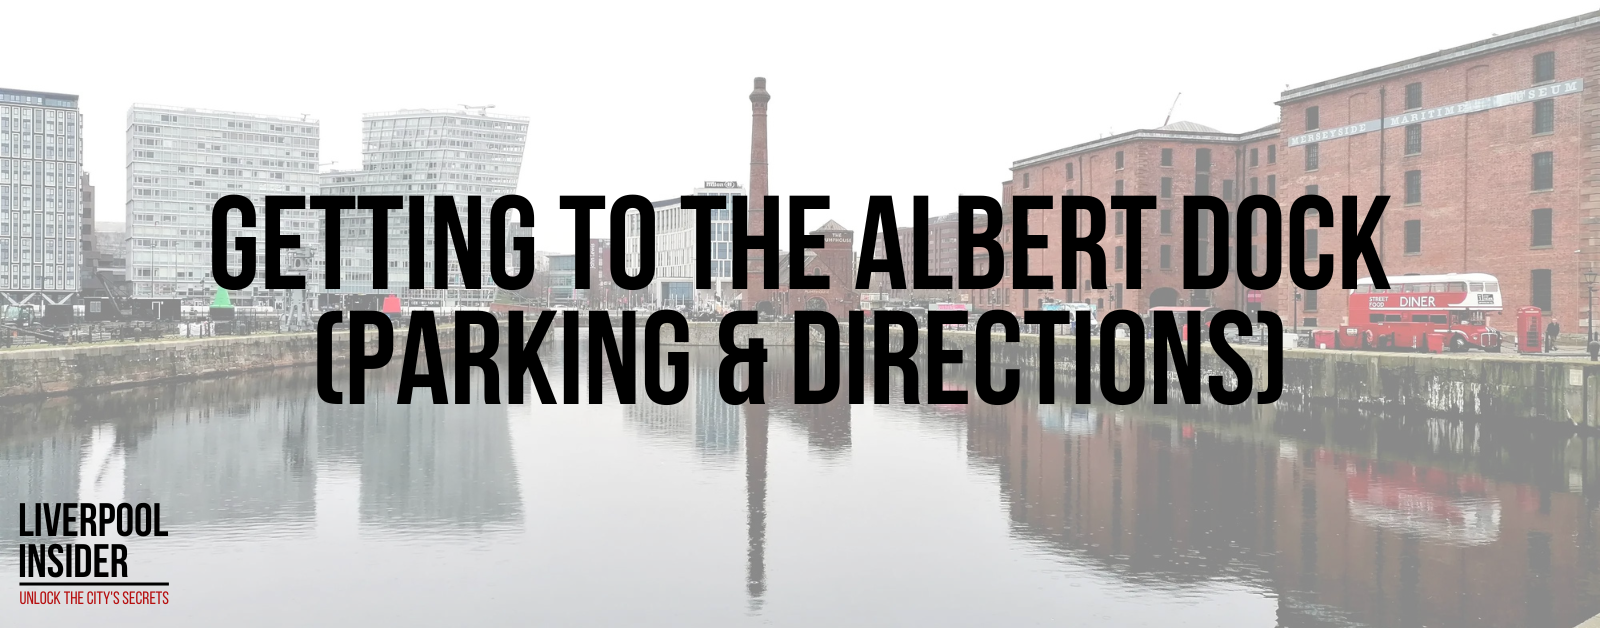 You are currently viewing Getting to The Albert Dock (Parking & Directions)